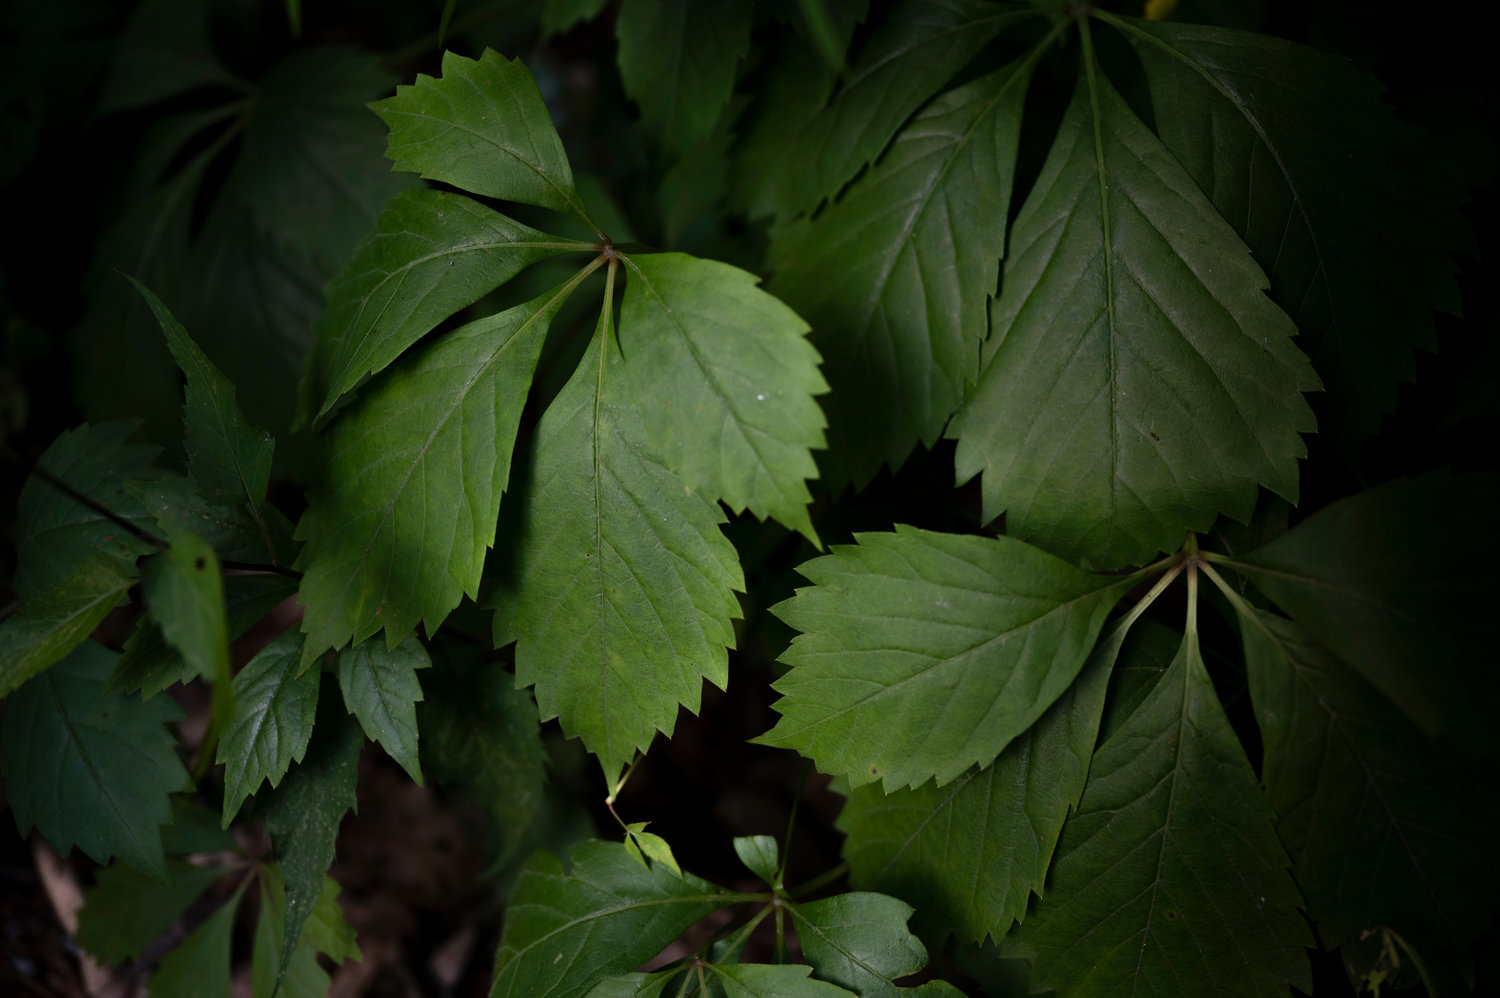 Van Cortlandt Park is known for some of its gorgeous greenery, but be careful — not everything visitors see is safe to be around. After spring, some plants like poison ivy find ways to really blend in with its neighbors. However, it can also be mistaken for Virginia creeper, which has five leaves instead of the distinctive three of poison ivy.